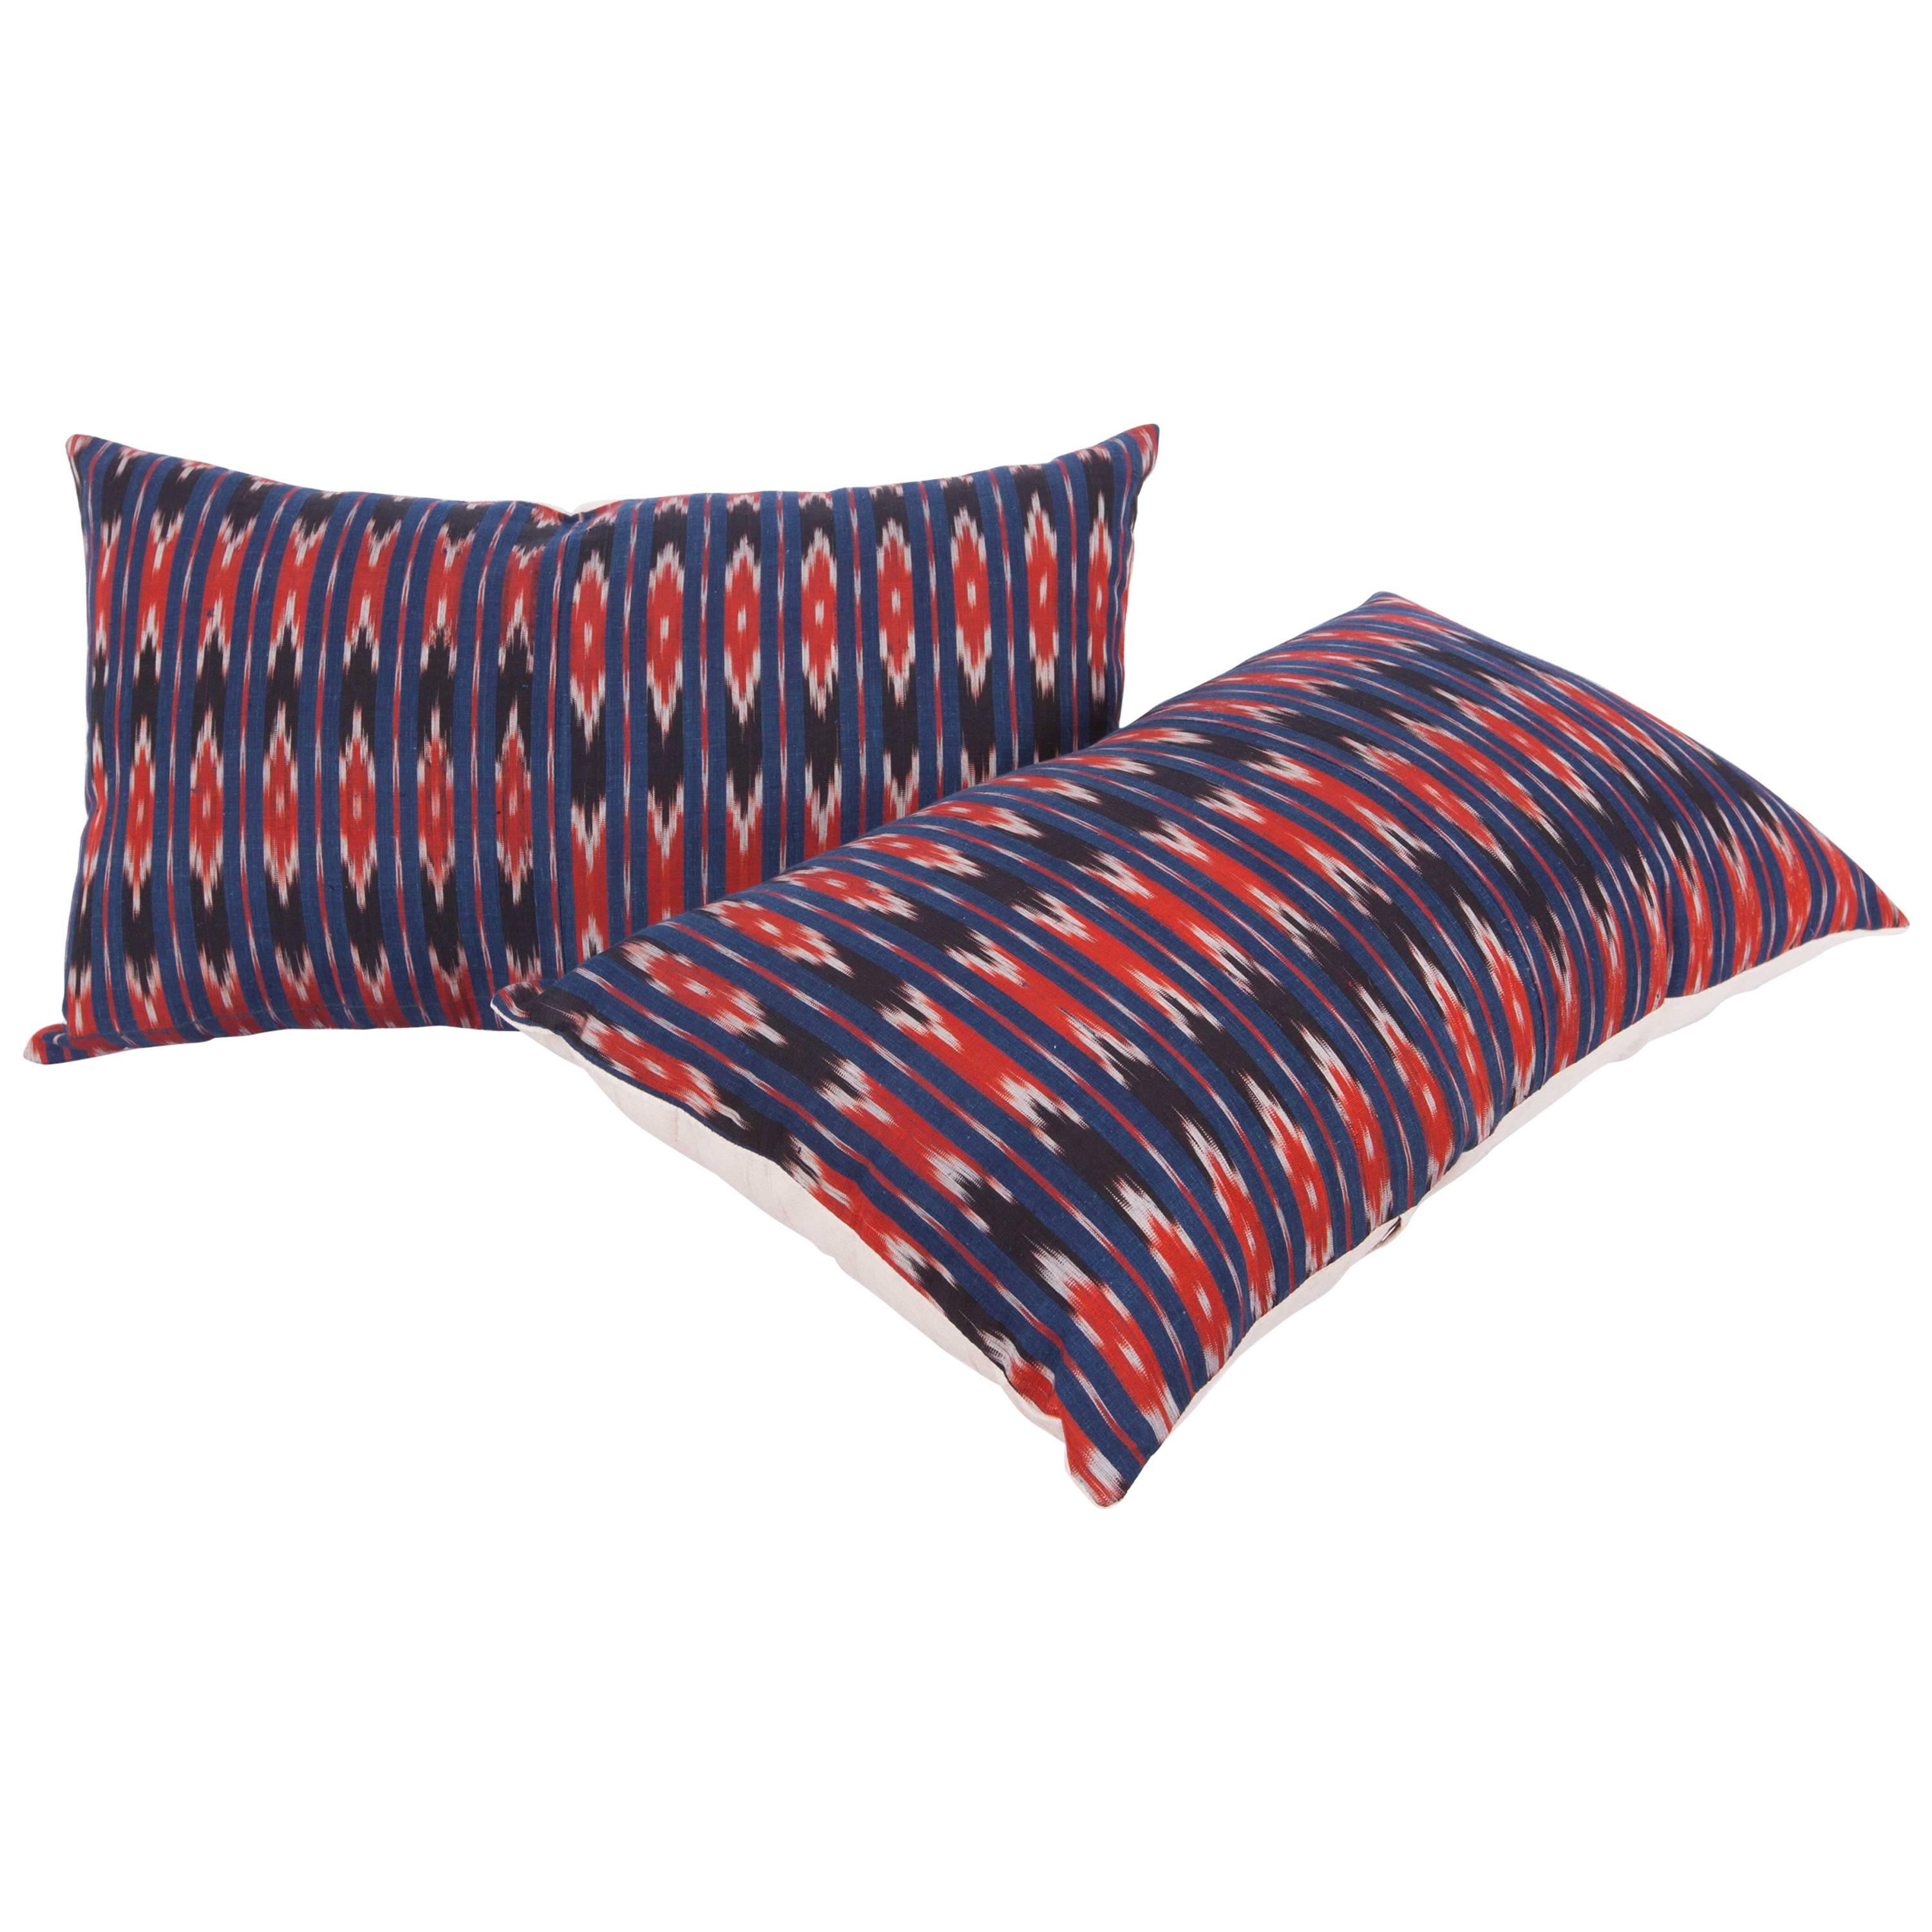 Pillow Cases Made from an Early 20th Century Syrian, Ikat Panel